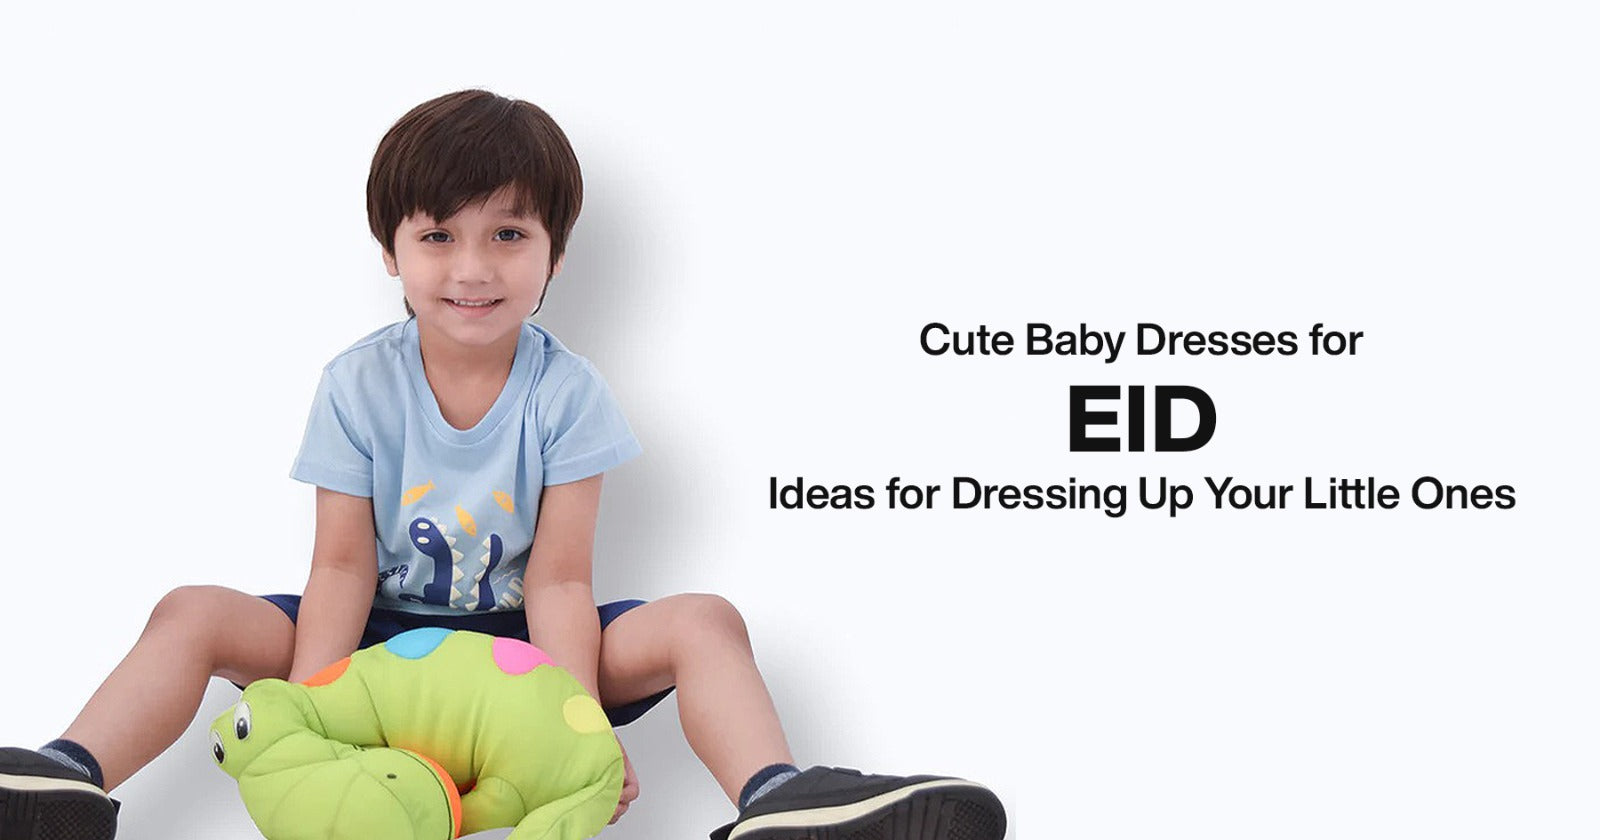 Cute Baby Dresses for Eid: Ideas for Dressing Up Your Little Ones